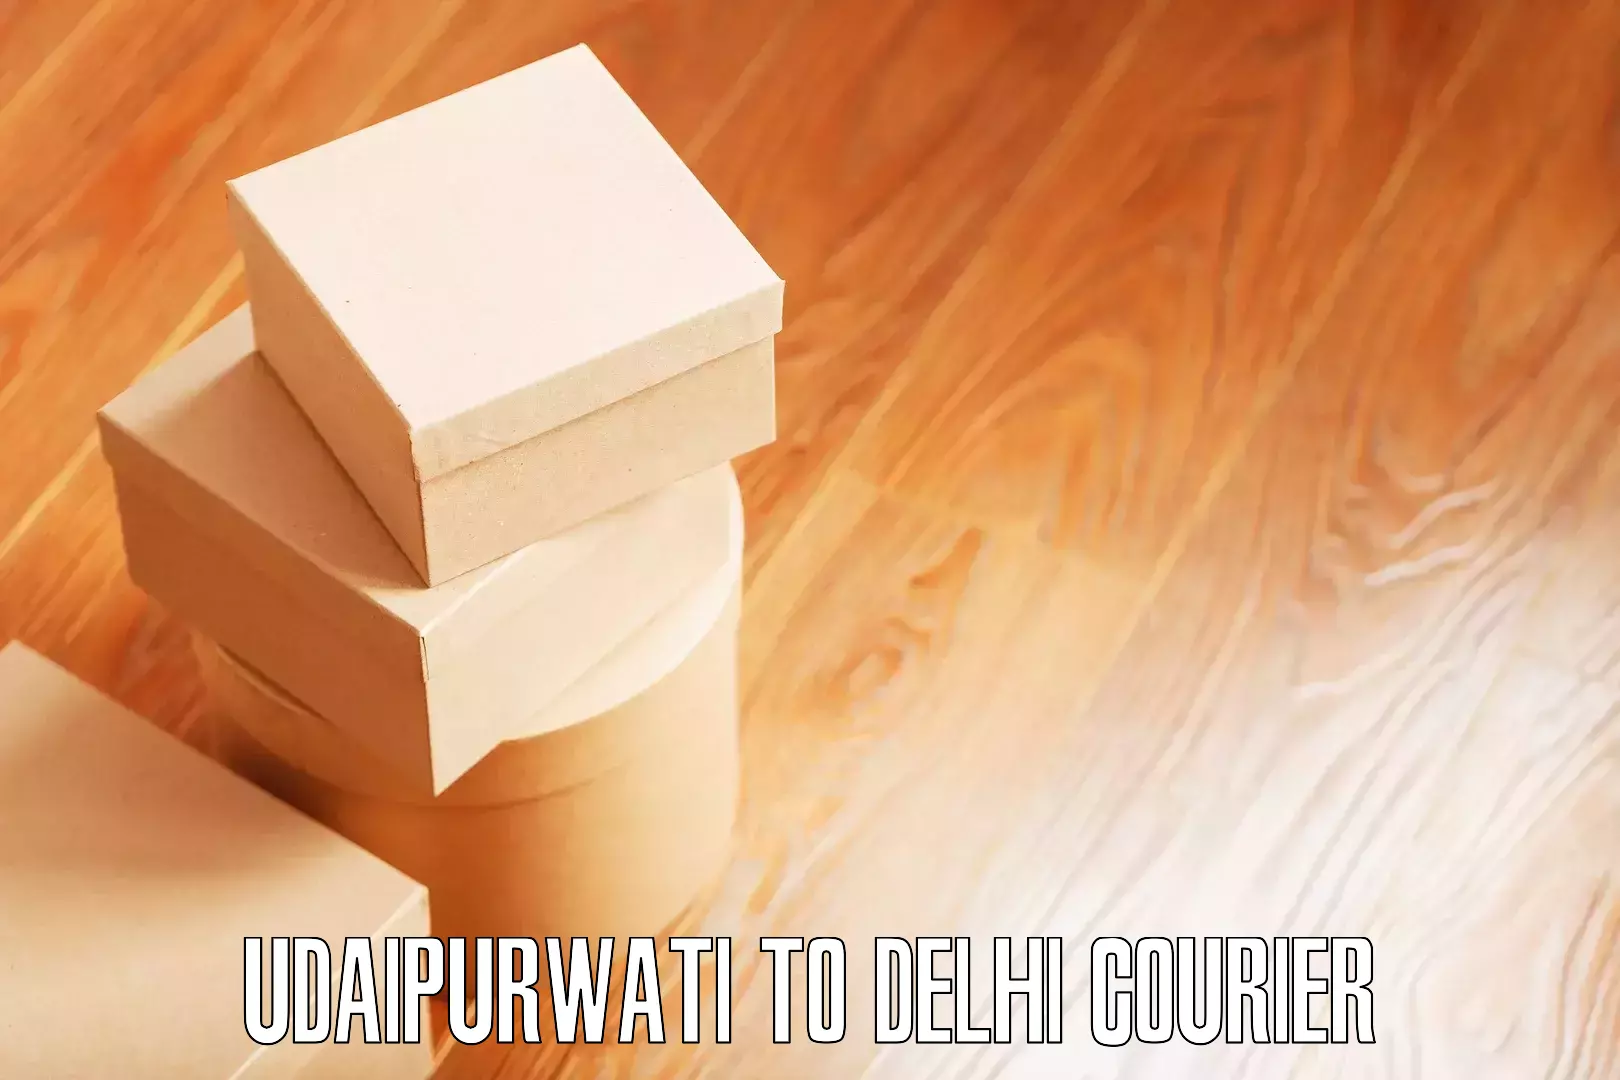 Efficient relocation services in Udaipurwati to Lodhi Road